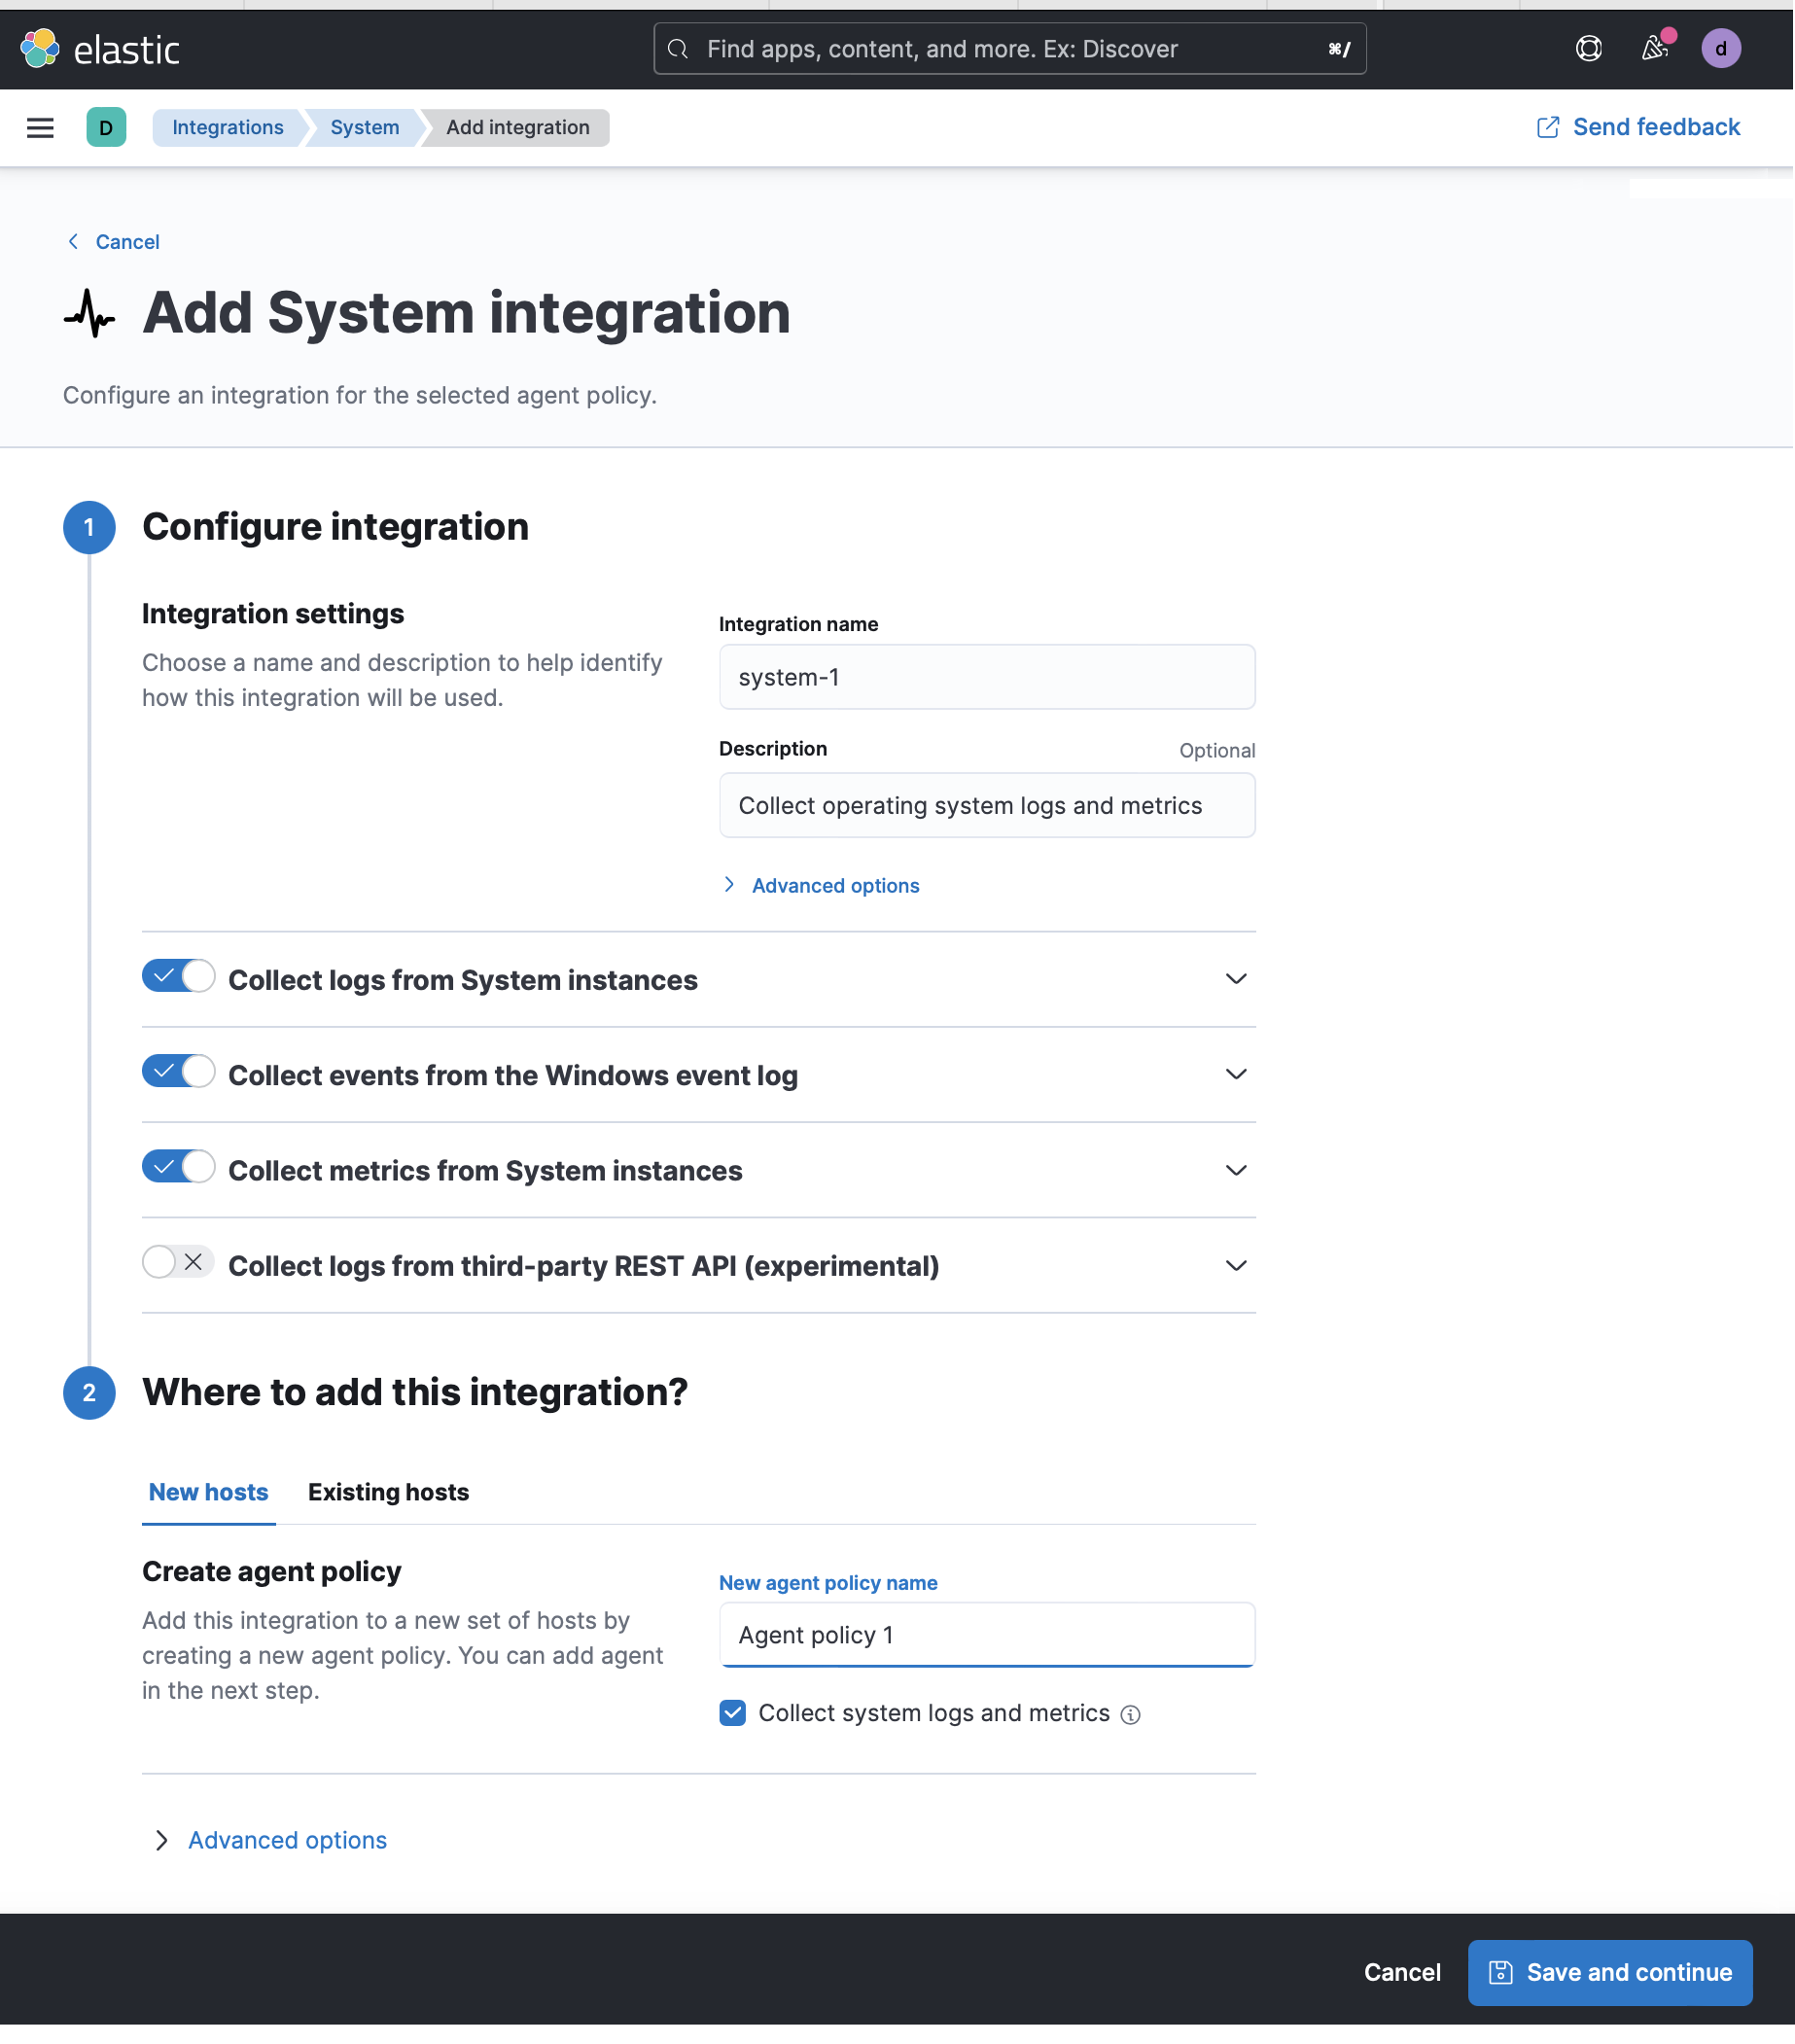 Configuration page for adding the Elastic Agent System integration